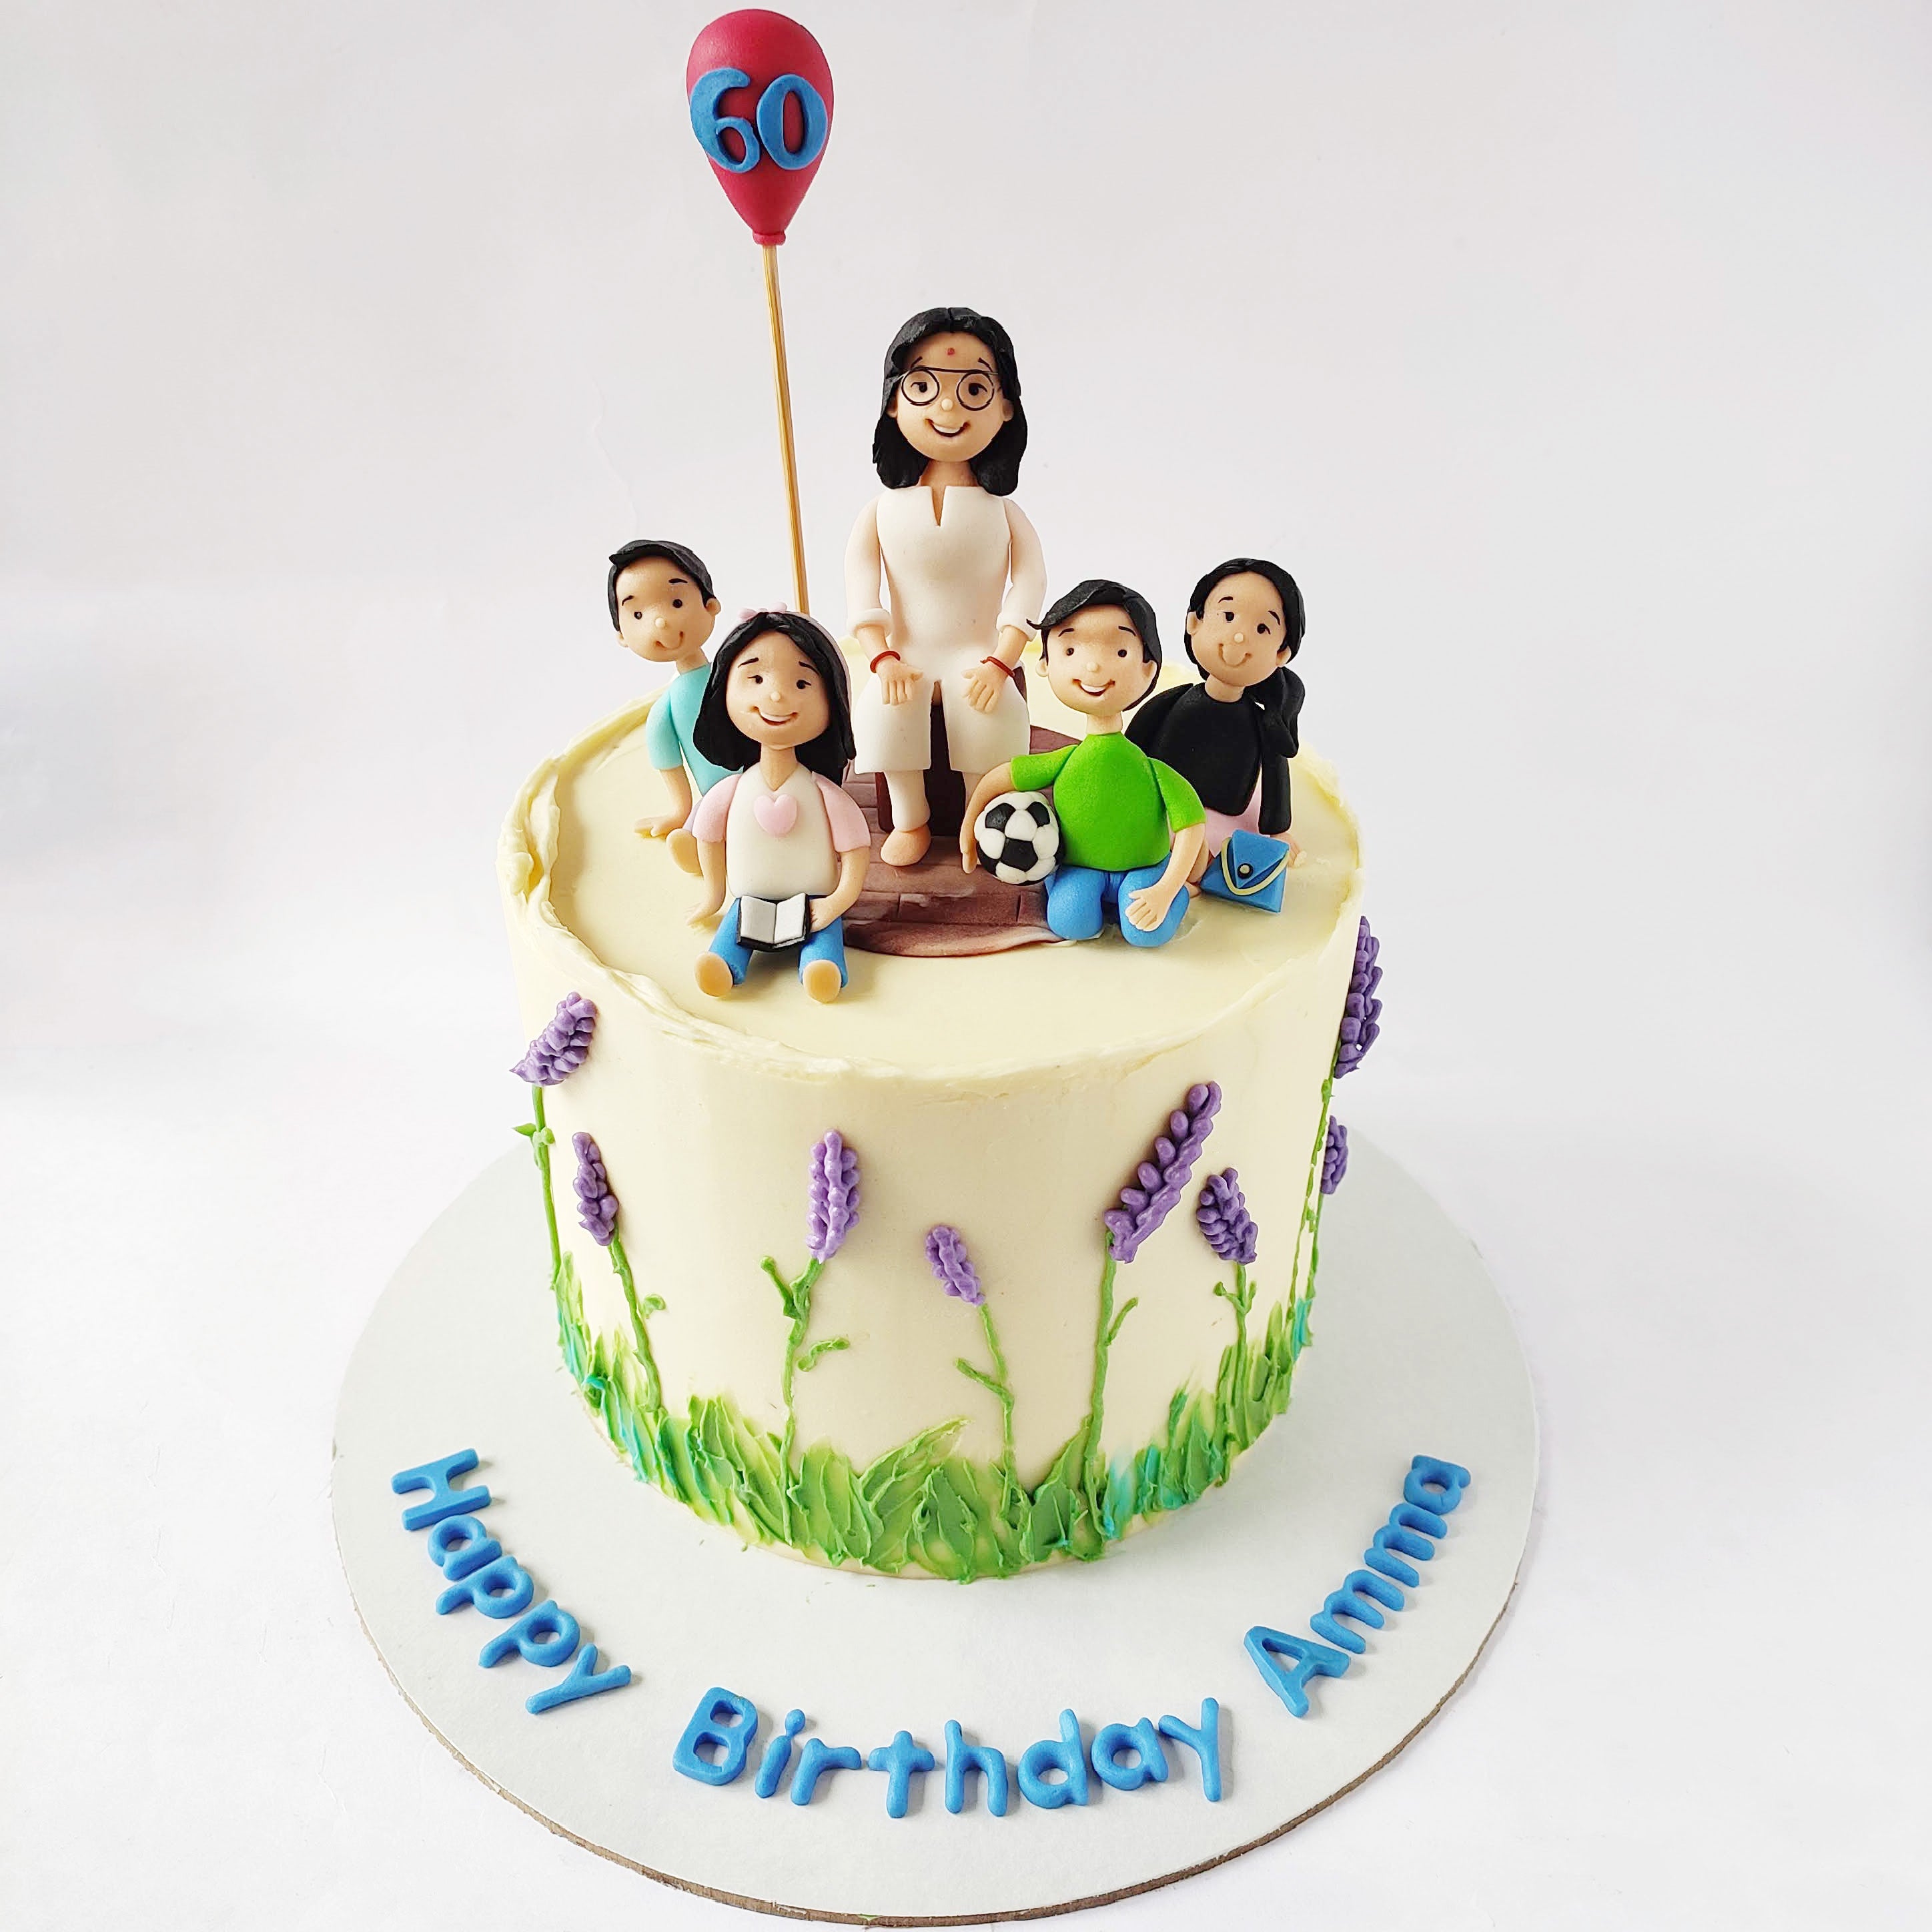 Inscription On Cake Beloved Grandmother 80 Photos and Images & Pictures |  Shutterstock